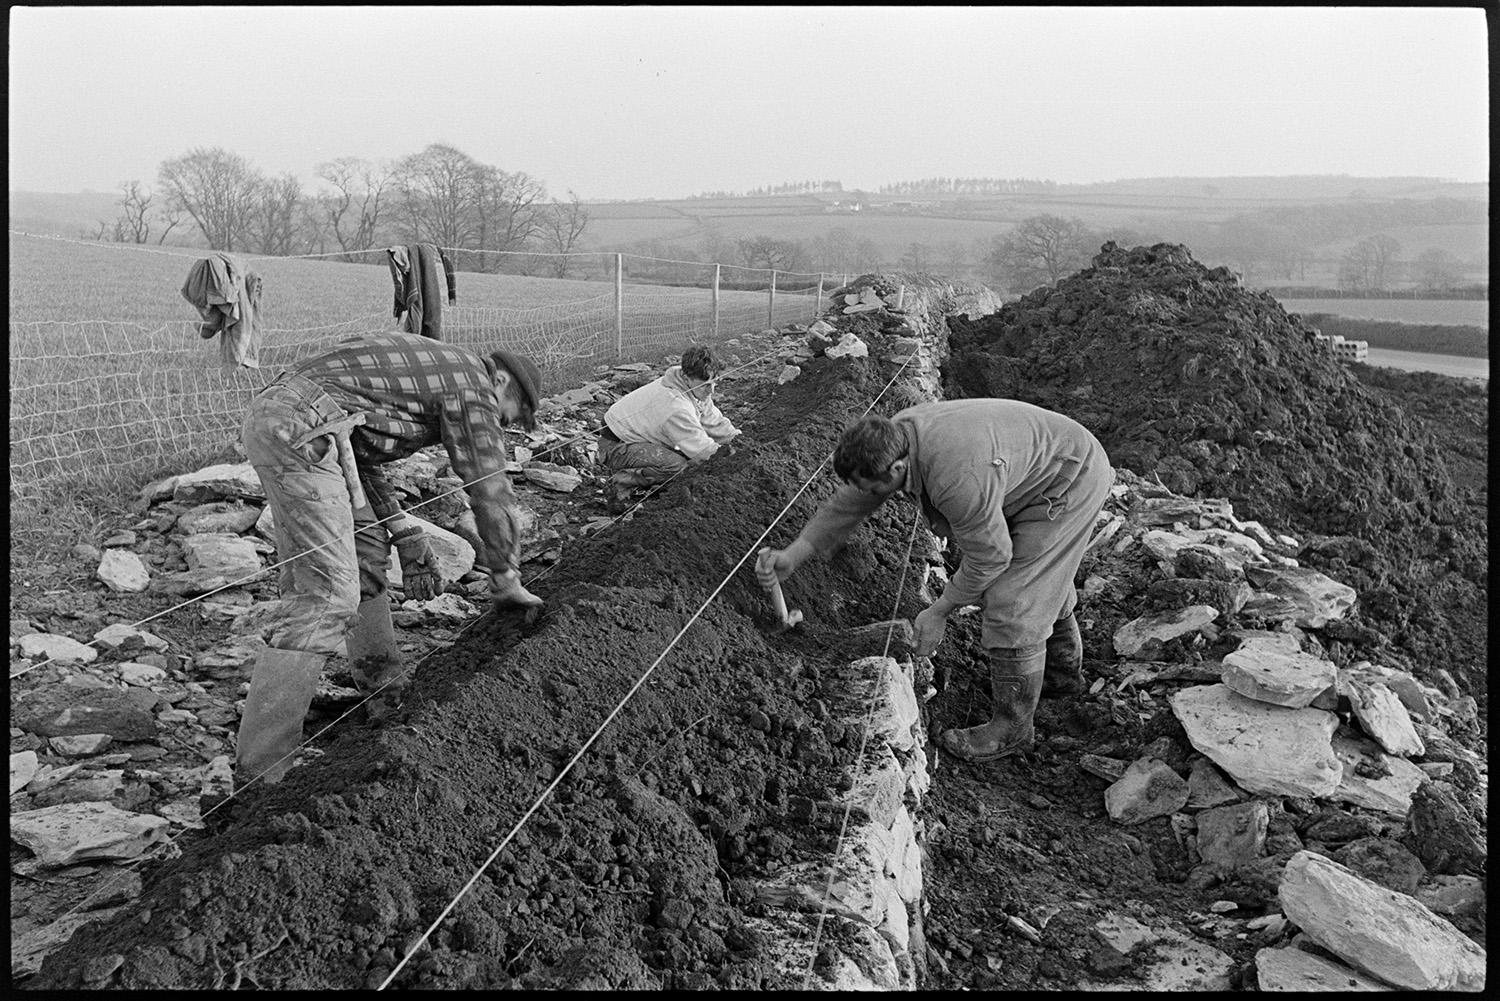 Men building dry stone wall beside road. 
[Three men building a dry stone wall at Leigh Cross, Chulmleigh. Their jackets are hung over a wire fence by the adjacent field and a large mound of earth can be seen in the background.]